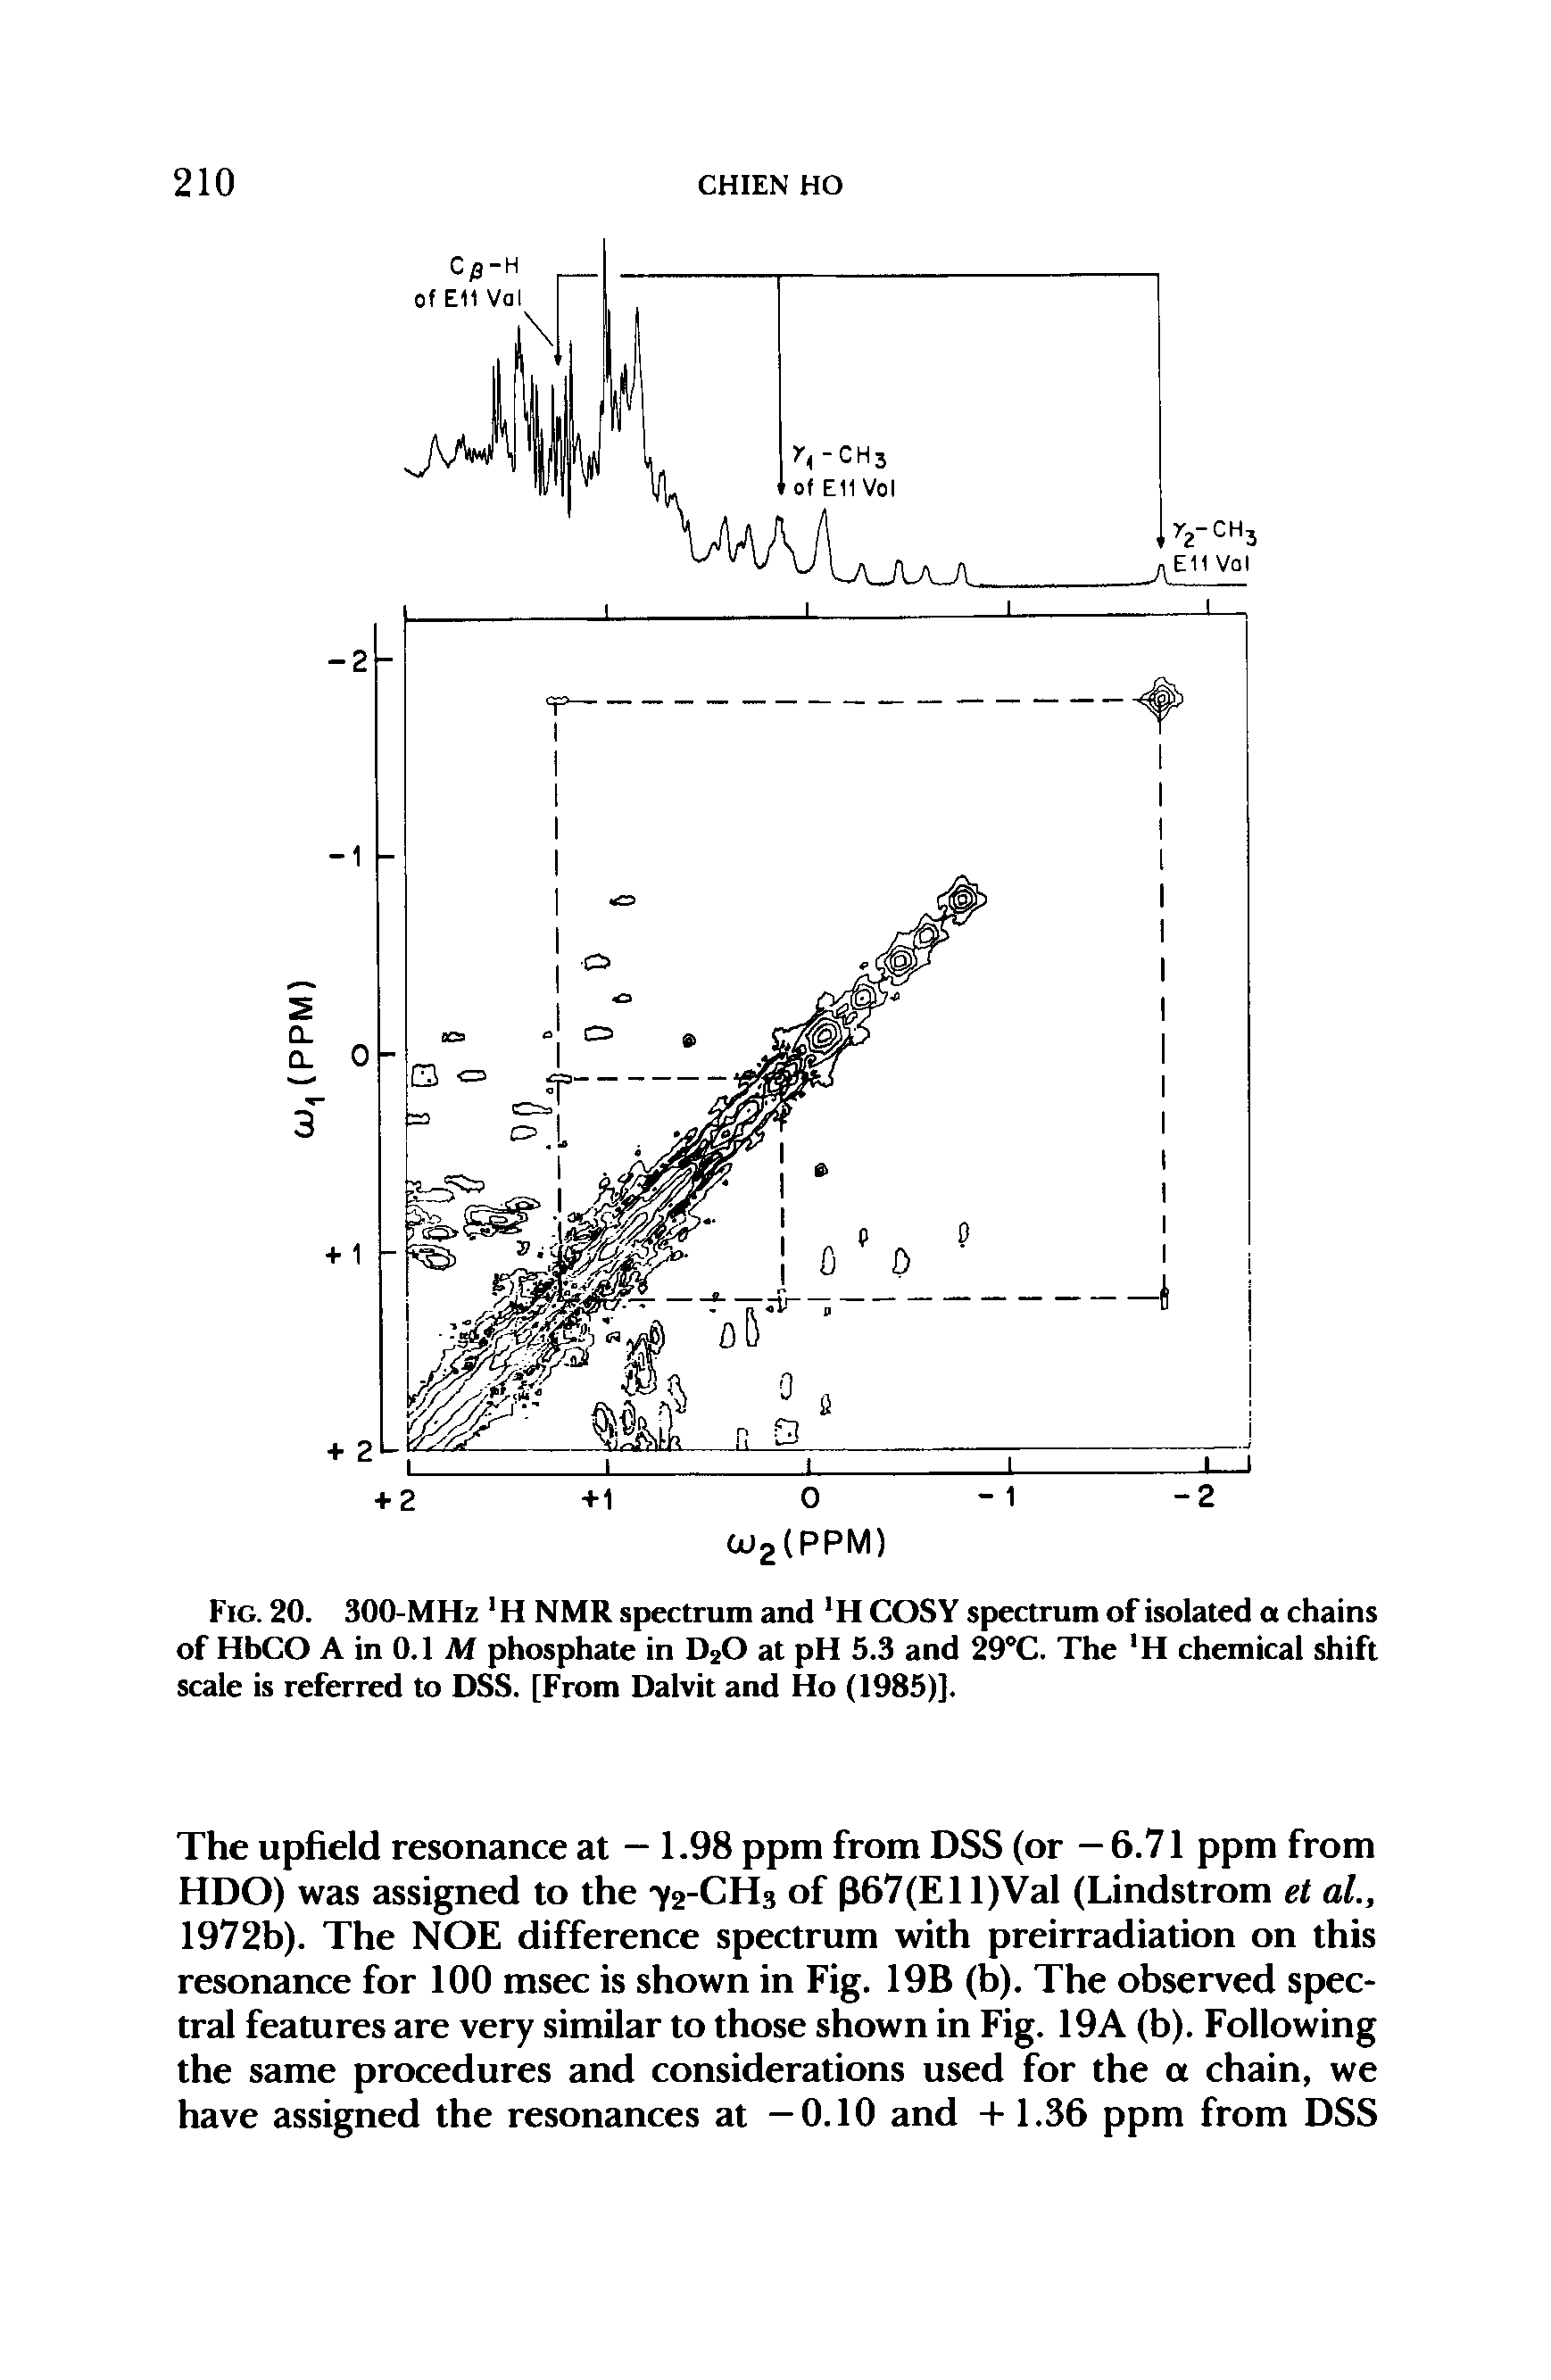 Fig. 20. 300-MHz H NMR spectrum and H COSY spectrum of isolated a chains of HbCO A in 0.1 Af phosphate in D20 at pH 5.3 and 29°C. The H chemical shift scale is referred to DSS. [From Dalvit and Ho (1985)].